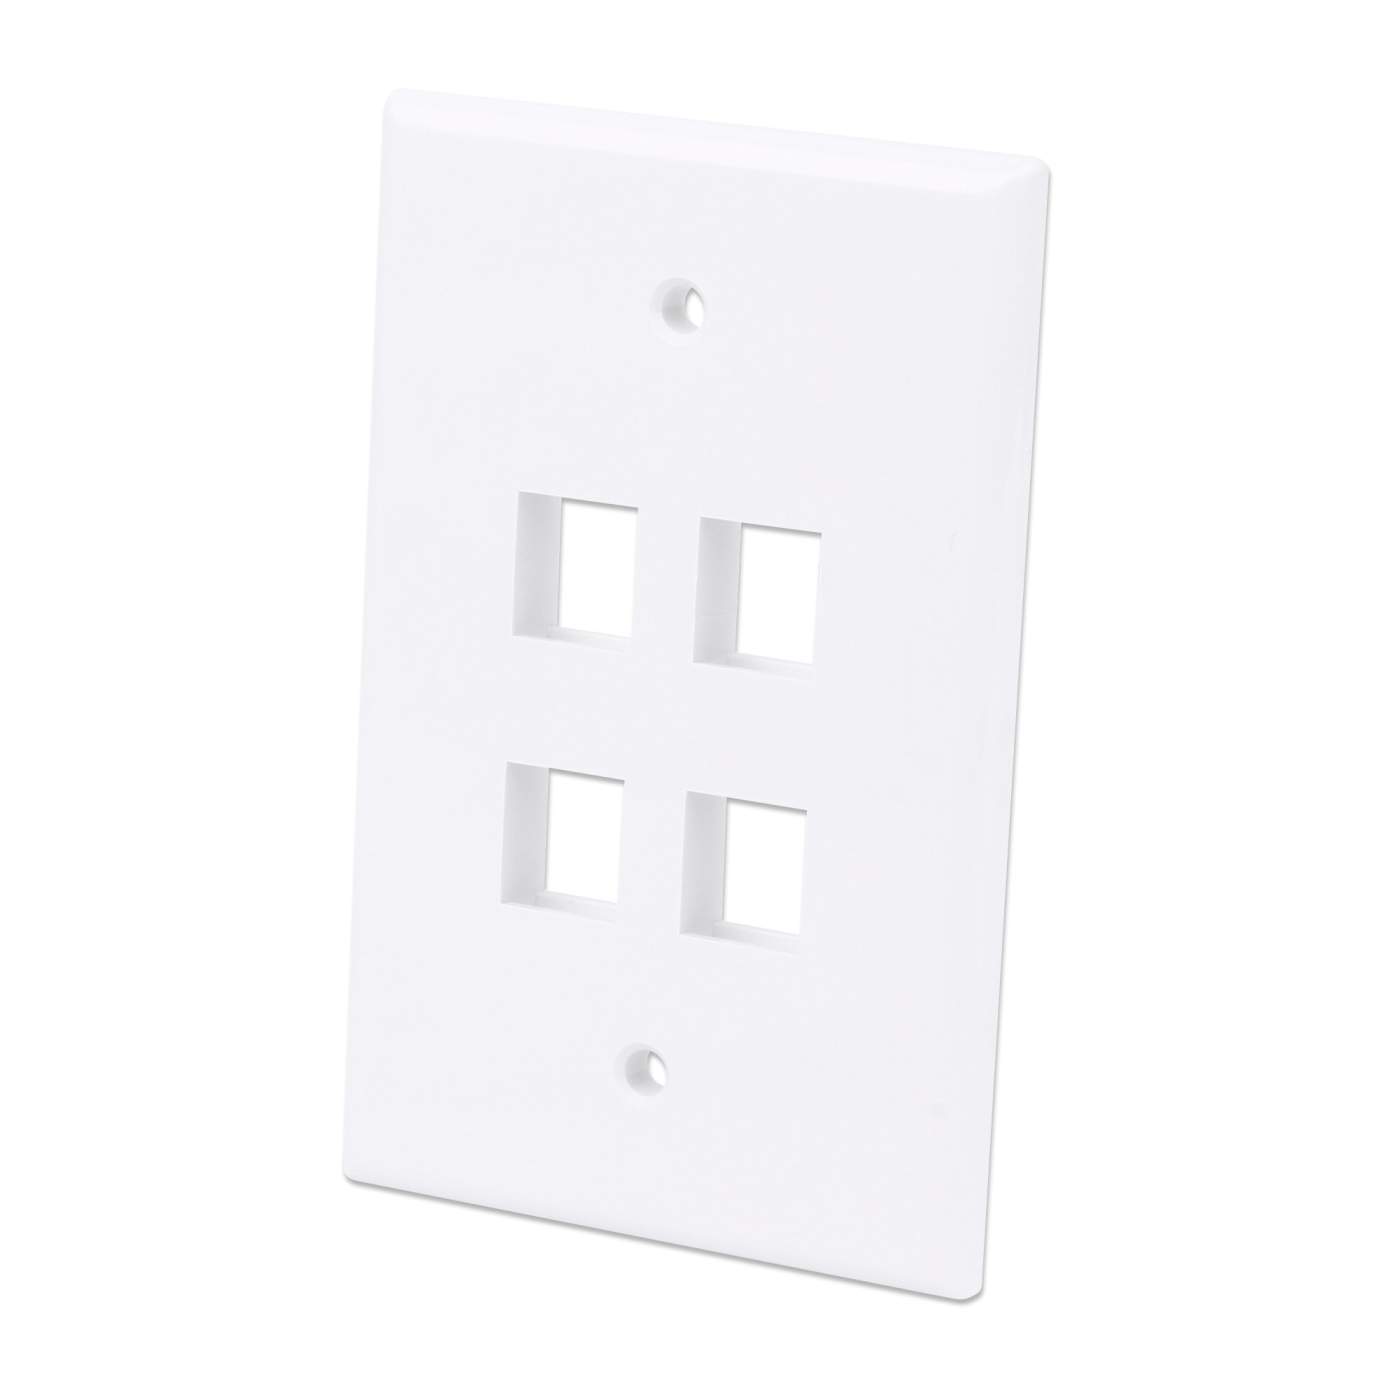 4-Outlet Oversized Keystone Wall Plate Image 1